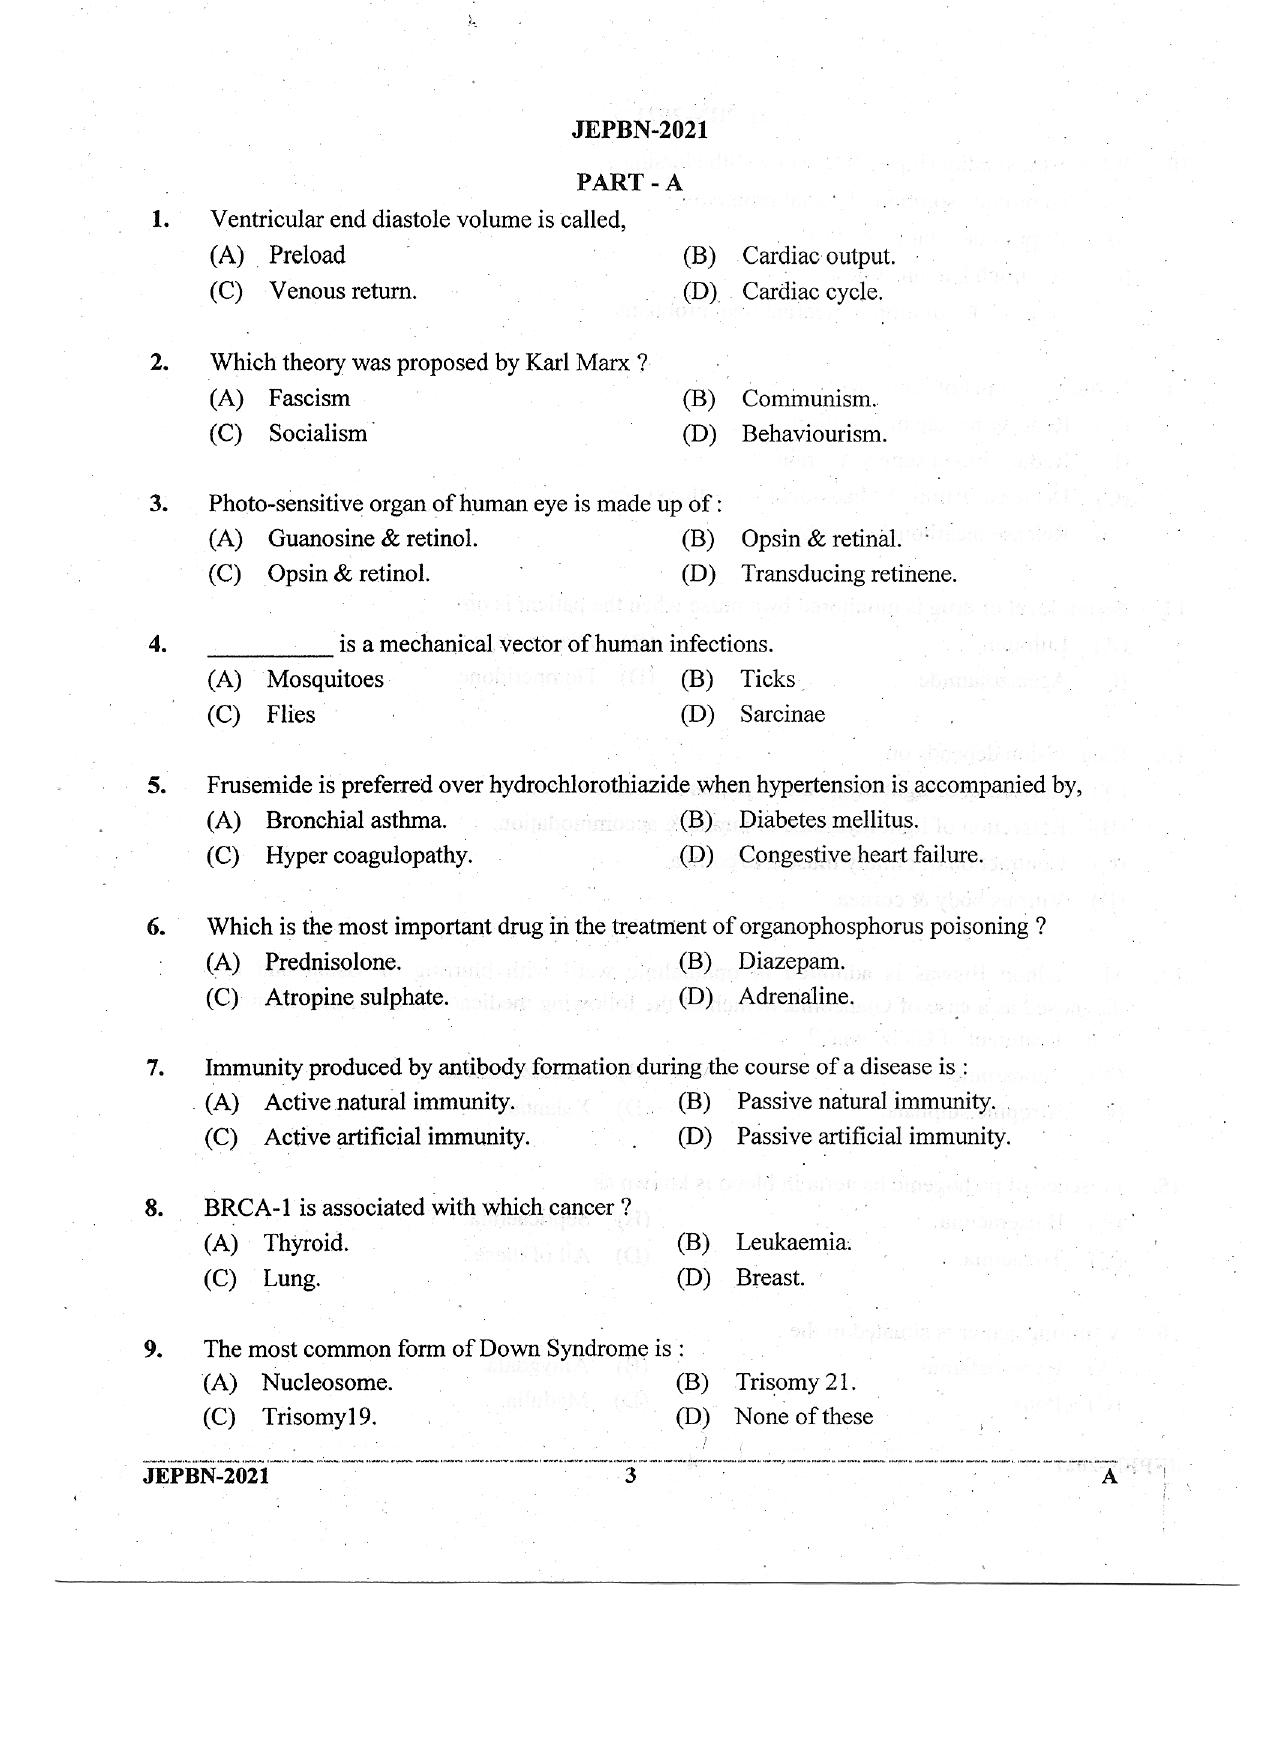 WBJEE JEPBN 2021 Question Paper - Page 3